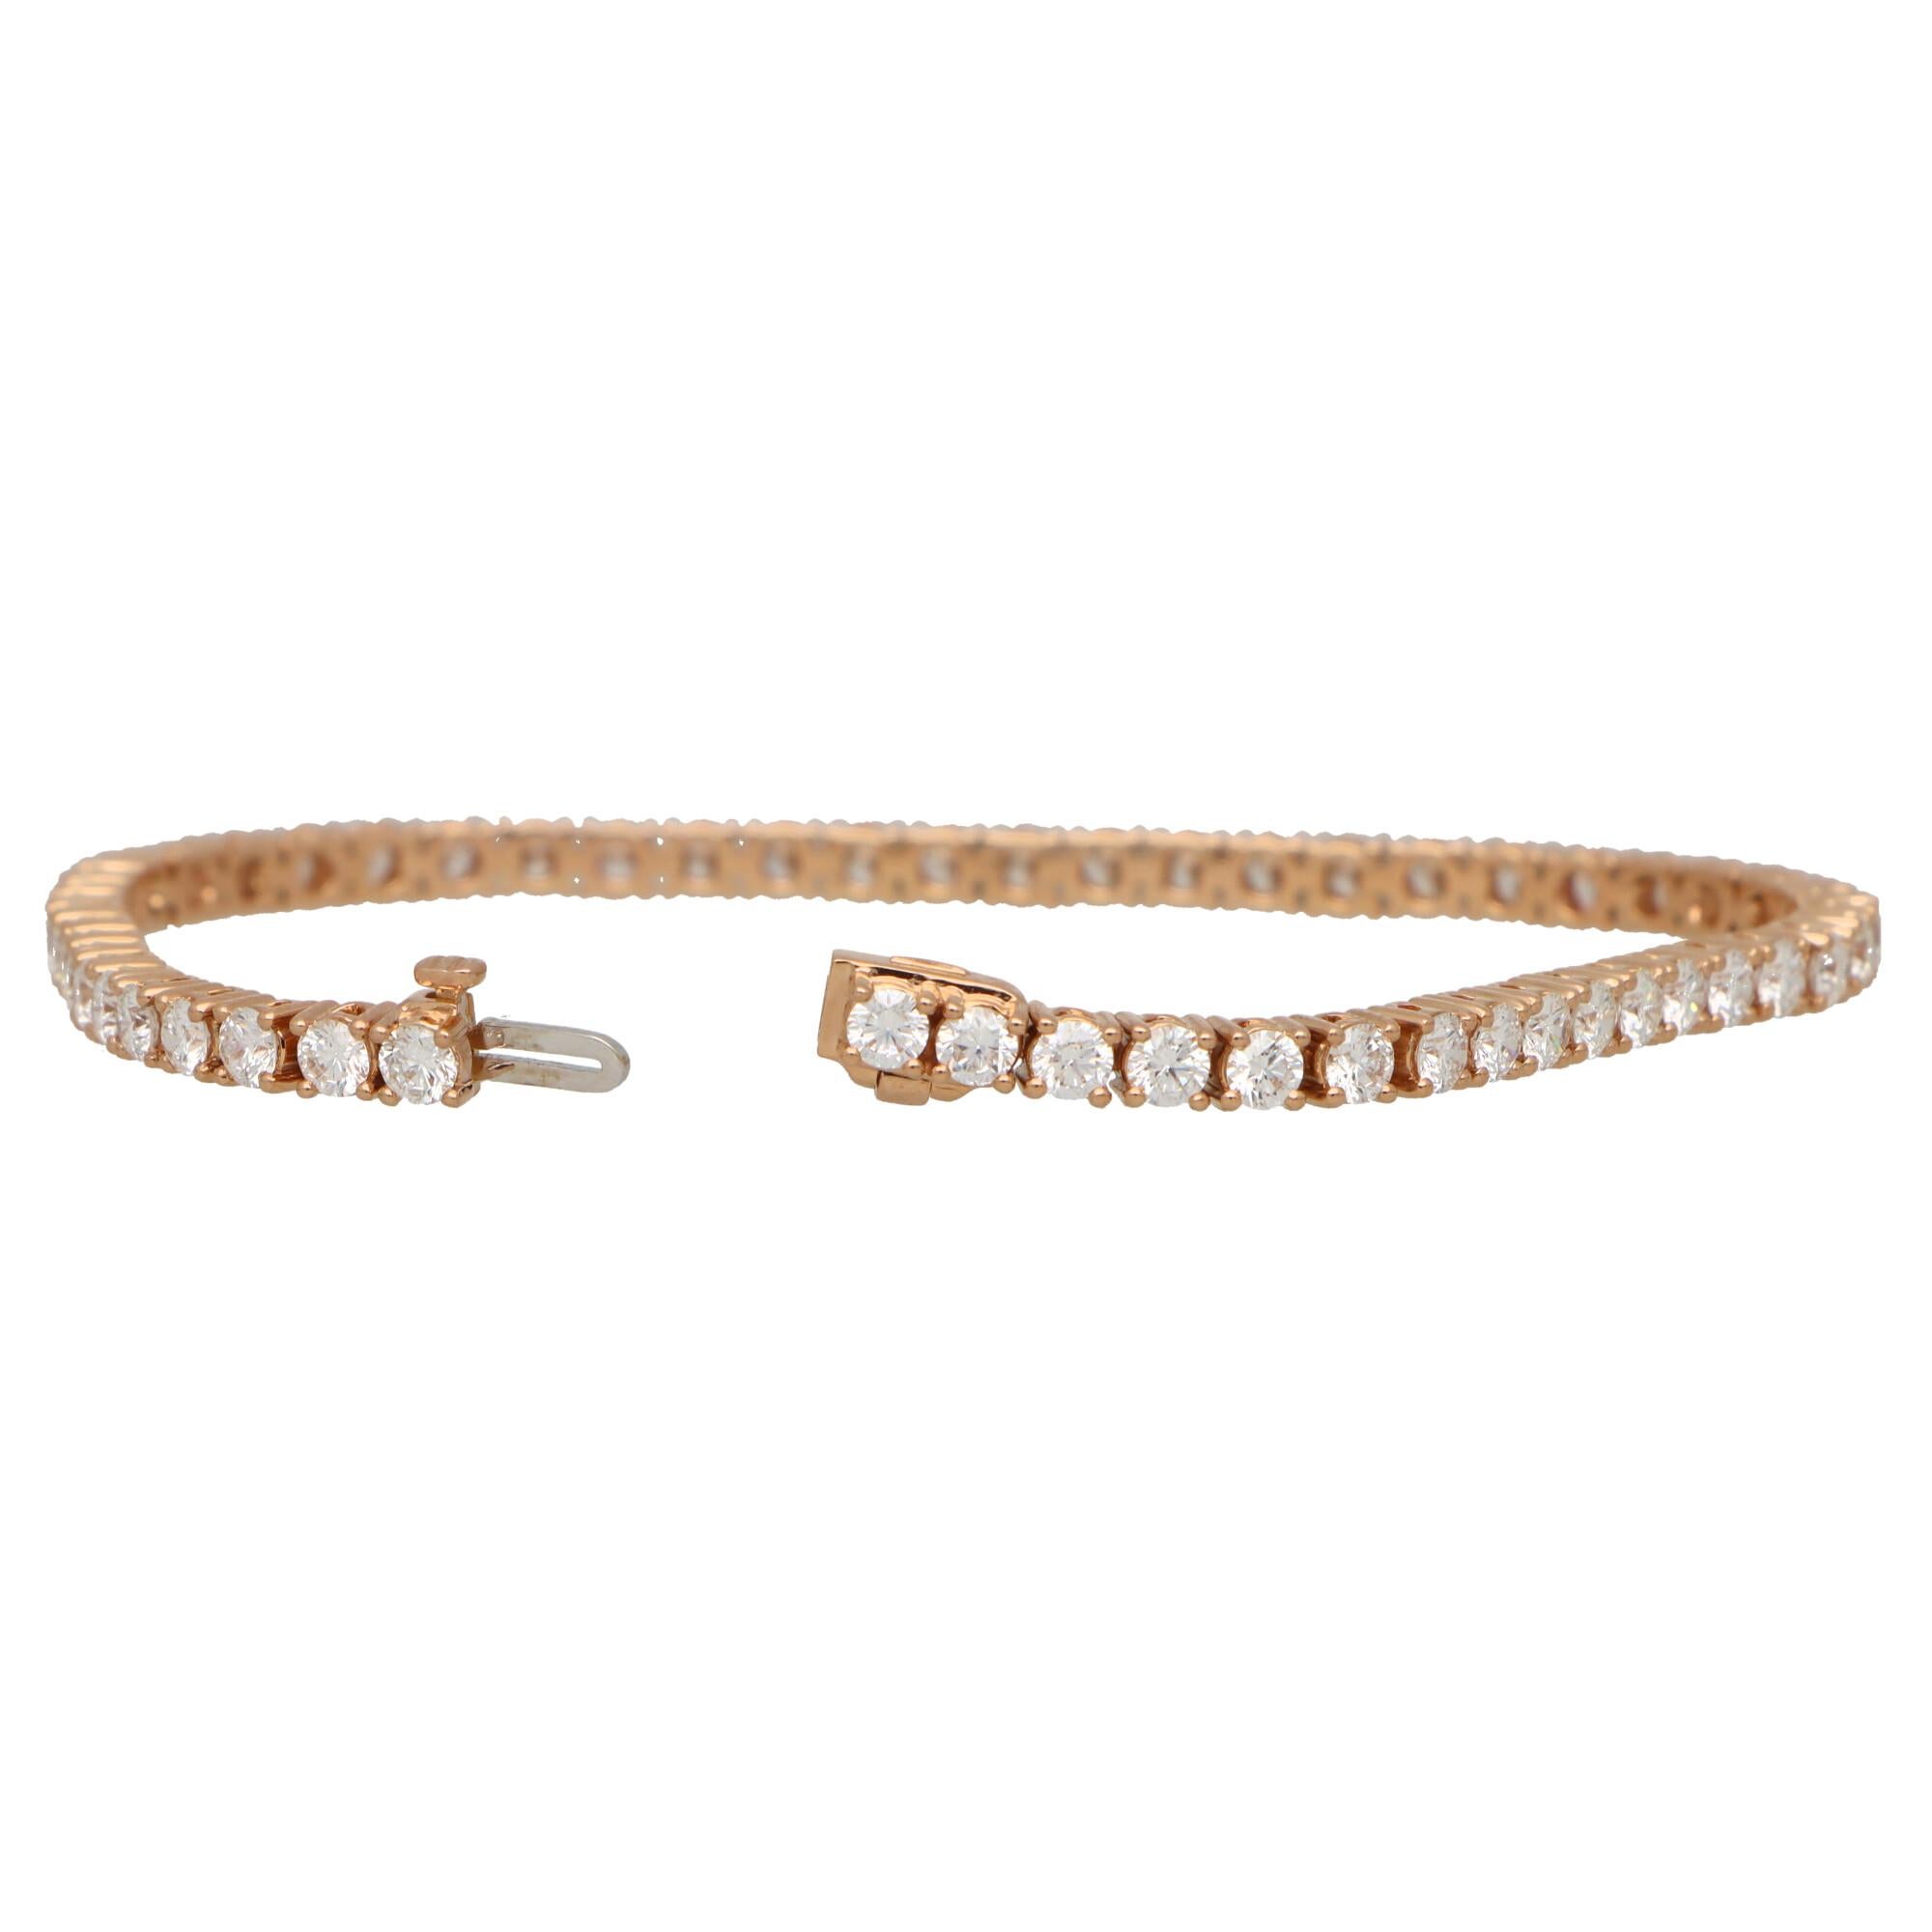  A lovely contemporary diamond line bracelet set in 18k rose gold.

The bracelet is composed of a grand total of 55 round brilliant cut sparkly diamonds, all of which are claw set securely. 

Due to the links being articulated, this allows the